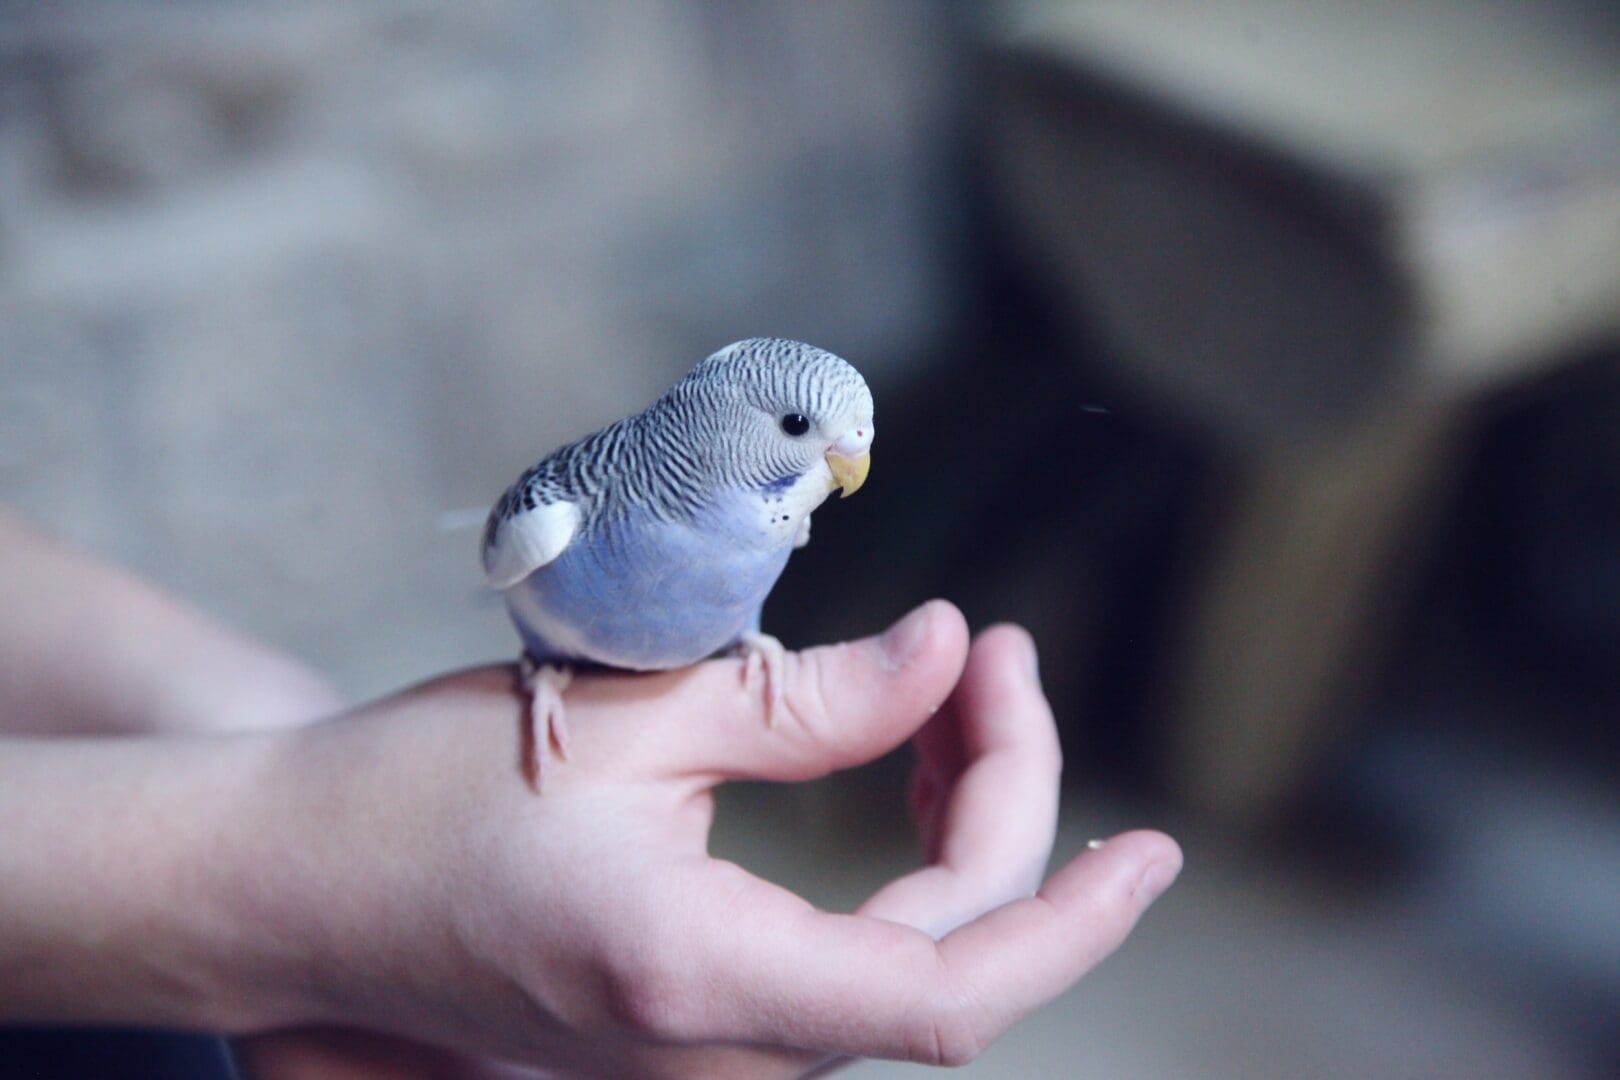 A blue and white bird sitting on a person's hand.